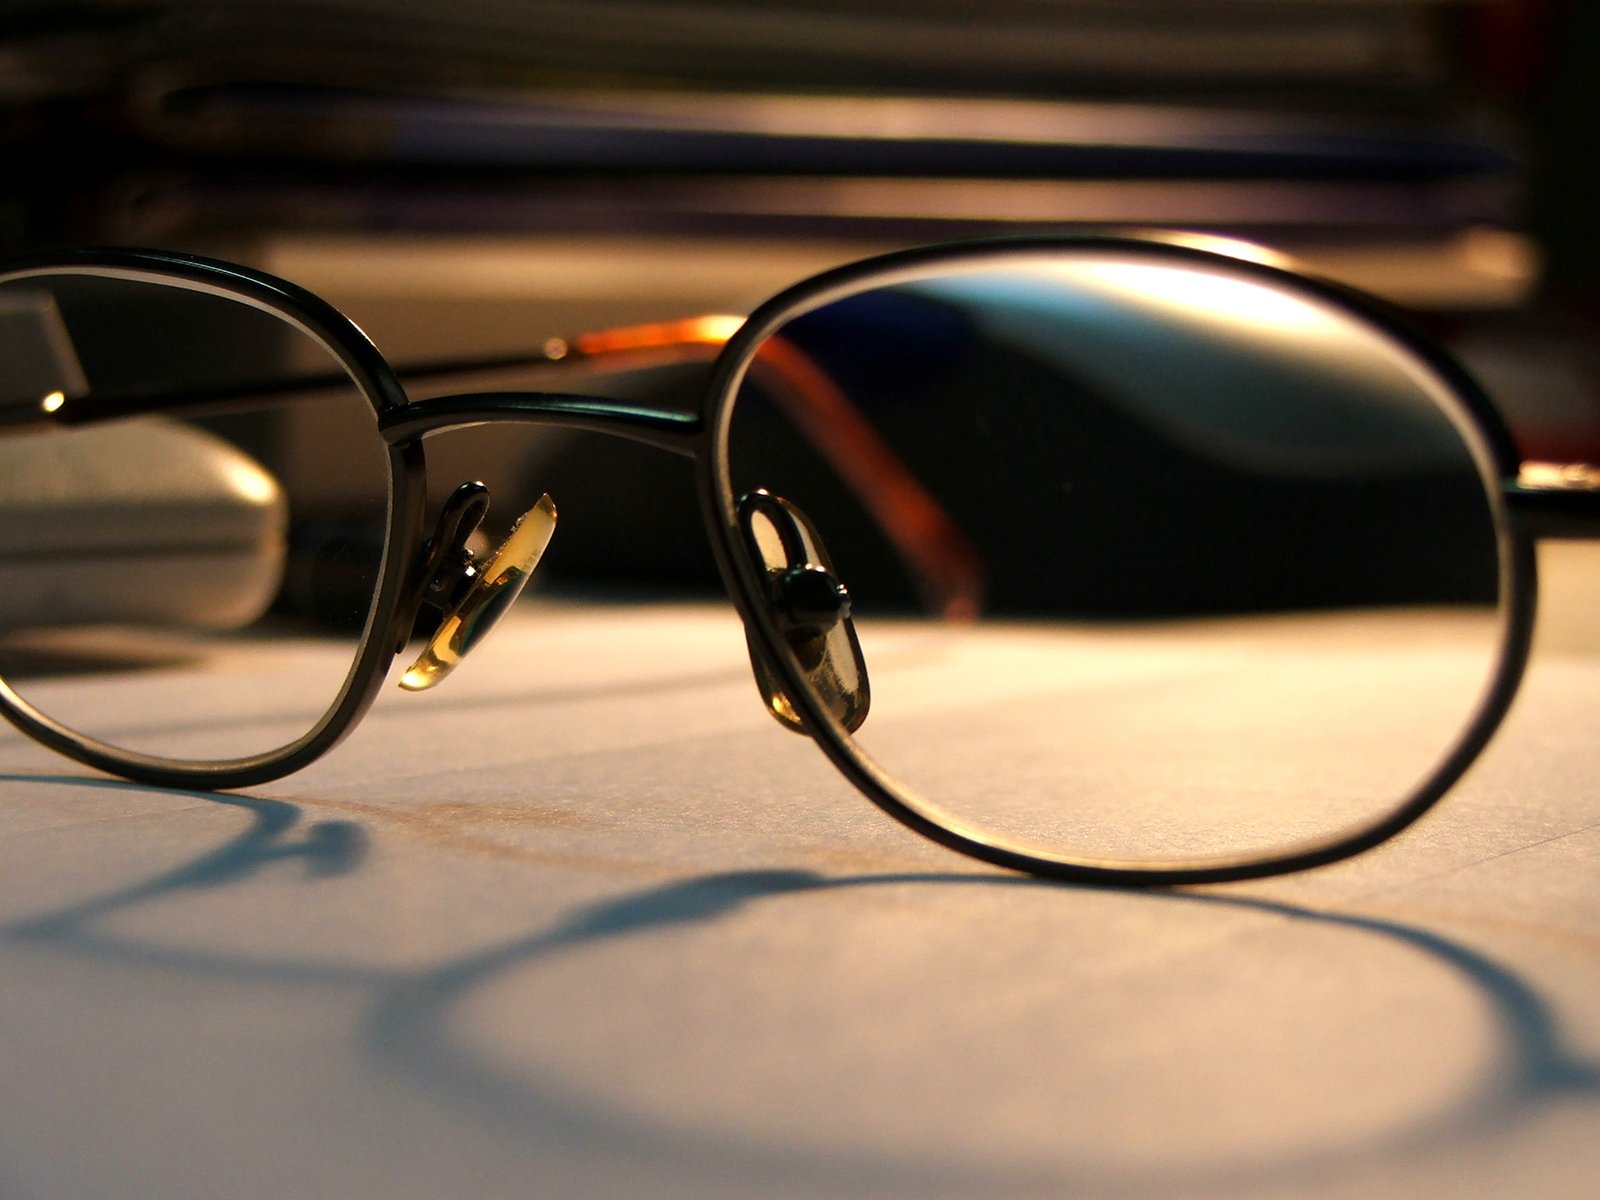 an empty pair of glasses lying on a surface